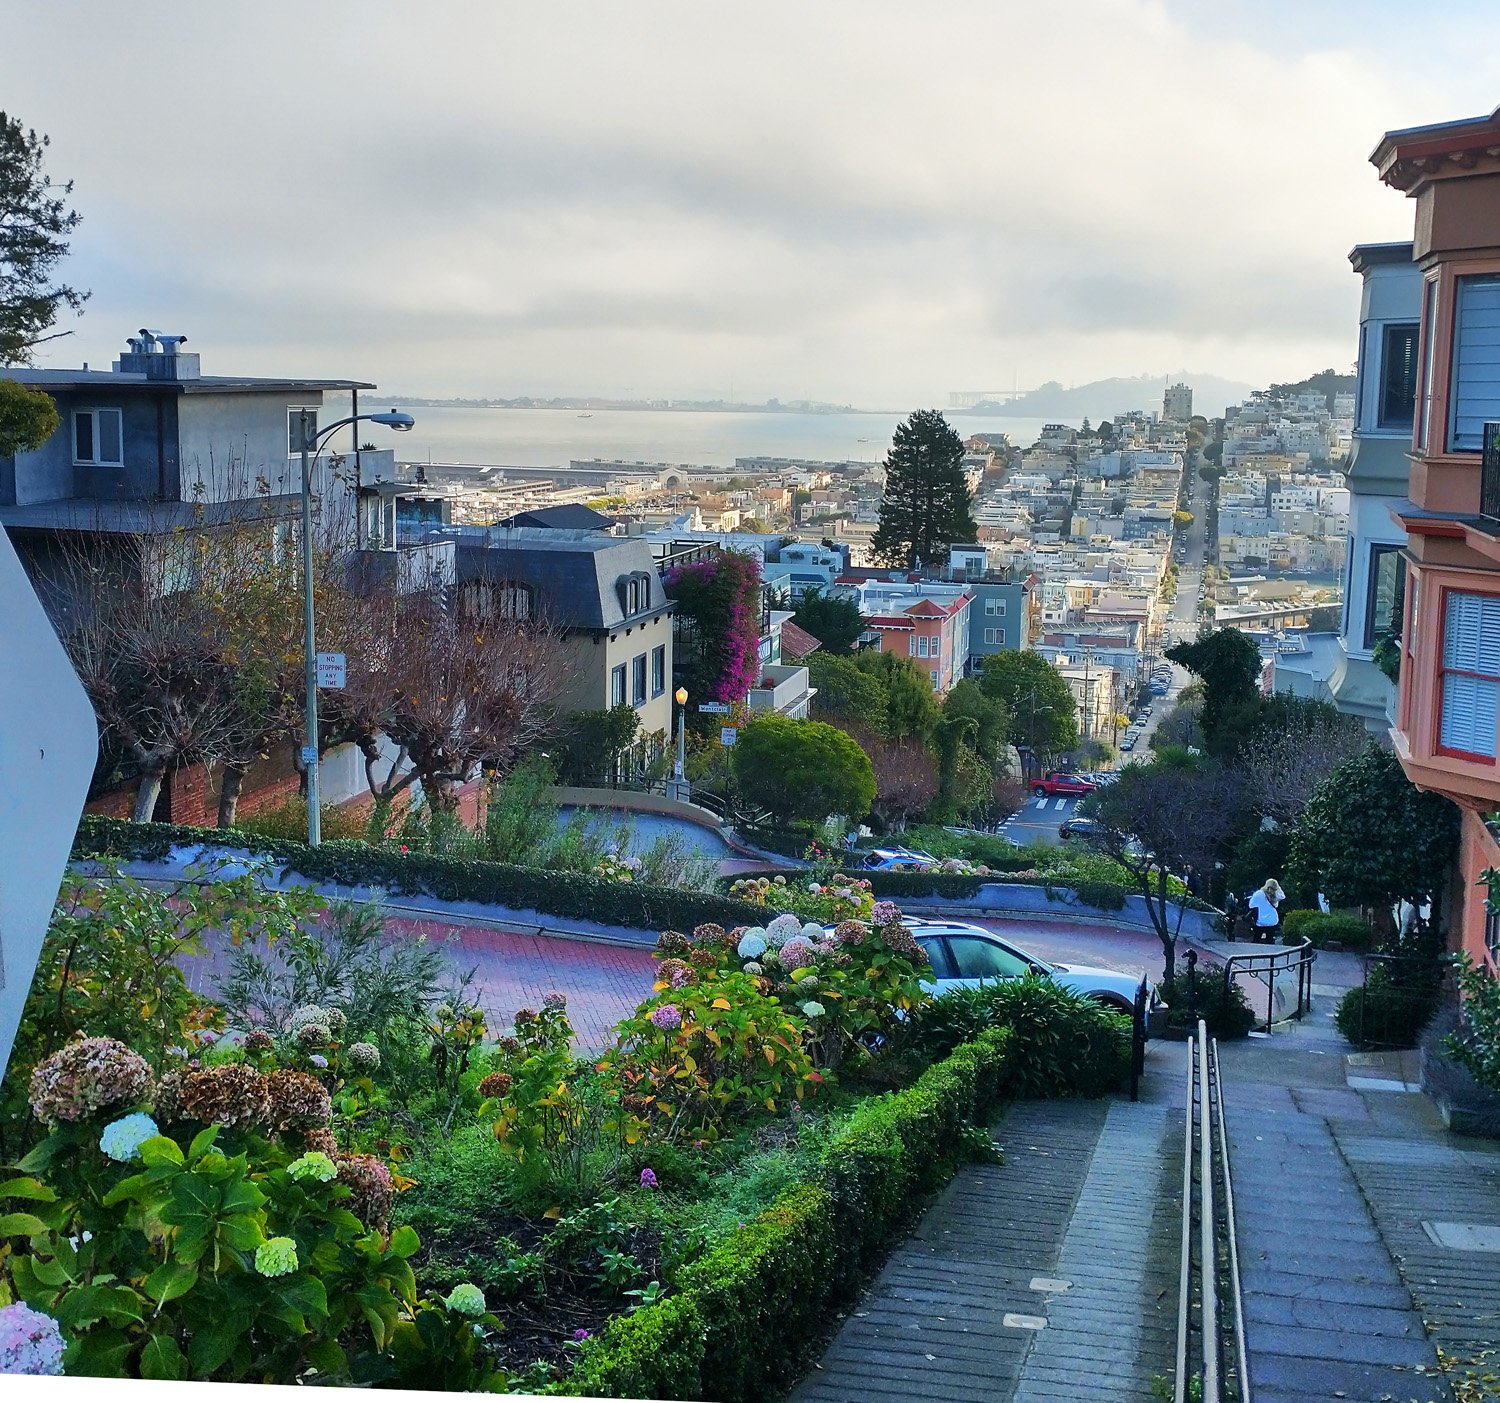 My garbage visit to Lombard street. Enjoy this picture from the top...?